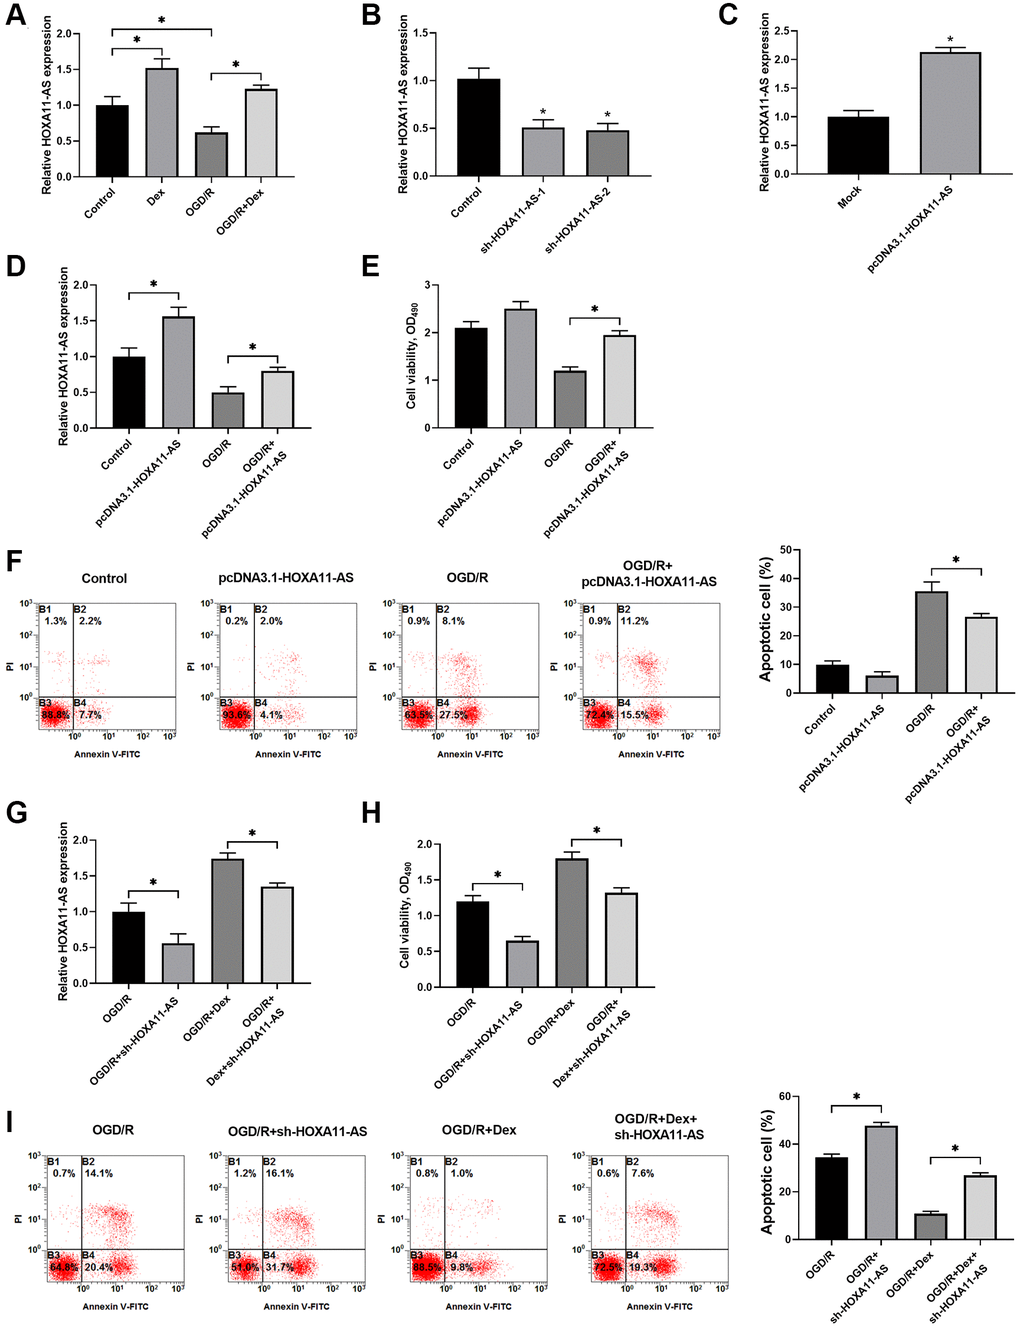 Dex treatment protected OGD/R-exposed Neuro-2a cells through up-regulation of HOXA11-AS expression and increased cell survival. (A) Neuro-2a cells with or without OGD/R were pre-treated with 10 μM Dex. The expression of HOXA11-AS was determined by quantitative real-time PCR. (B, C) Knockdown (B) and over-expression (C) of HOXA11-AS by transfection of sh-HOXA11-AS and pcDNA3.1-HOXA11-AS, respectively, were verified by quantitative real-time PCR. (D–F) Neuro-2a cells were transfected with control empty vector or pcDNA3.1-HOXA11-AS vector, and were left untreated or received OGD/R. Relative expression of HOXA11-AS (D), cell proliferation (E) and apoptosis of cells (F) in the indicated groups were quantitated. (G–I) Neuro-2a cells transfected with control sh-RNA or sh-HOXA11-AS were left untreated or treated with 10 μM Dex. Cells were then subjected to OGD/R. Relative expression of HOXA11-AS (G), cell proliferation (H) and apoptosis of cells (I) in the indicated groups were quantitated. n = 3 for each group; *P 